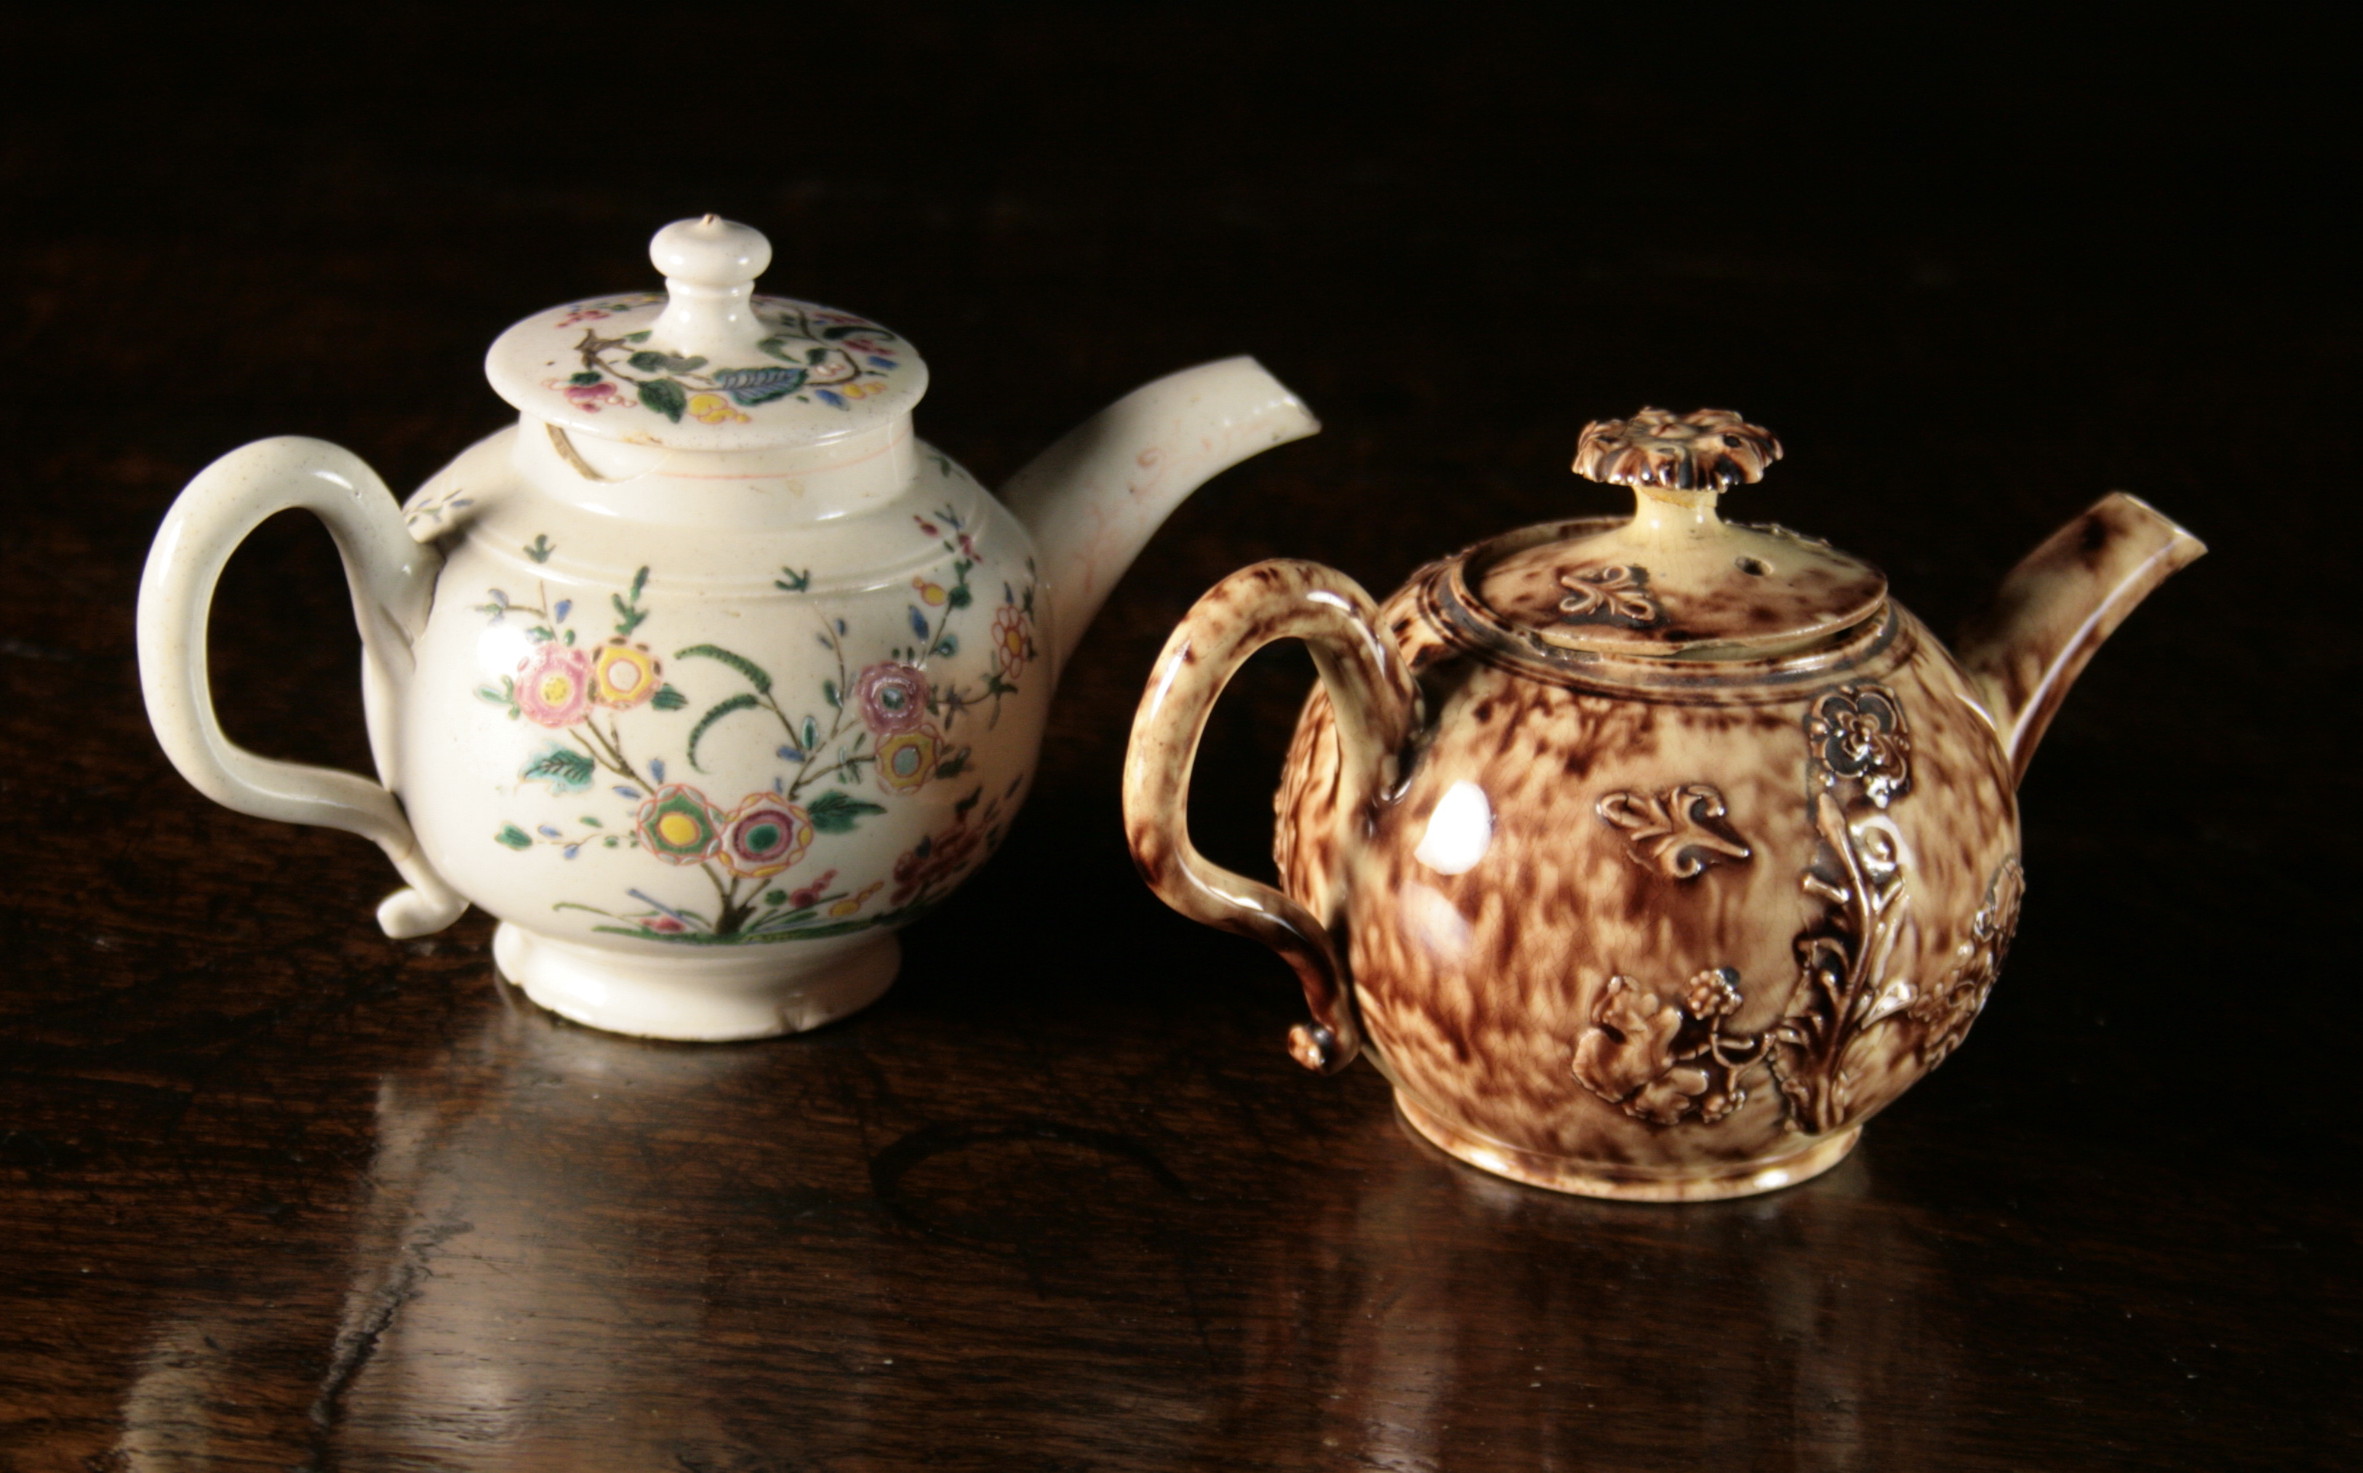 Two Miniature 18th Century Teapots: A Wheildon example, sprigged with flowering plants, 2¾ ins (7